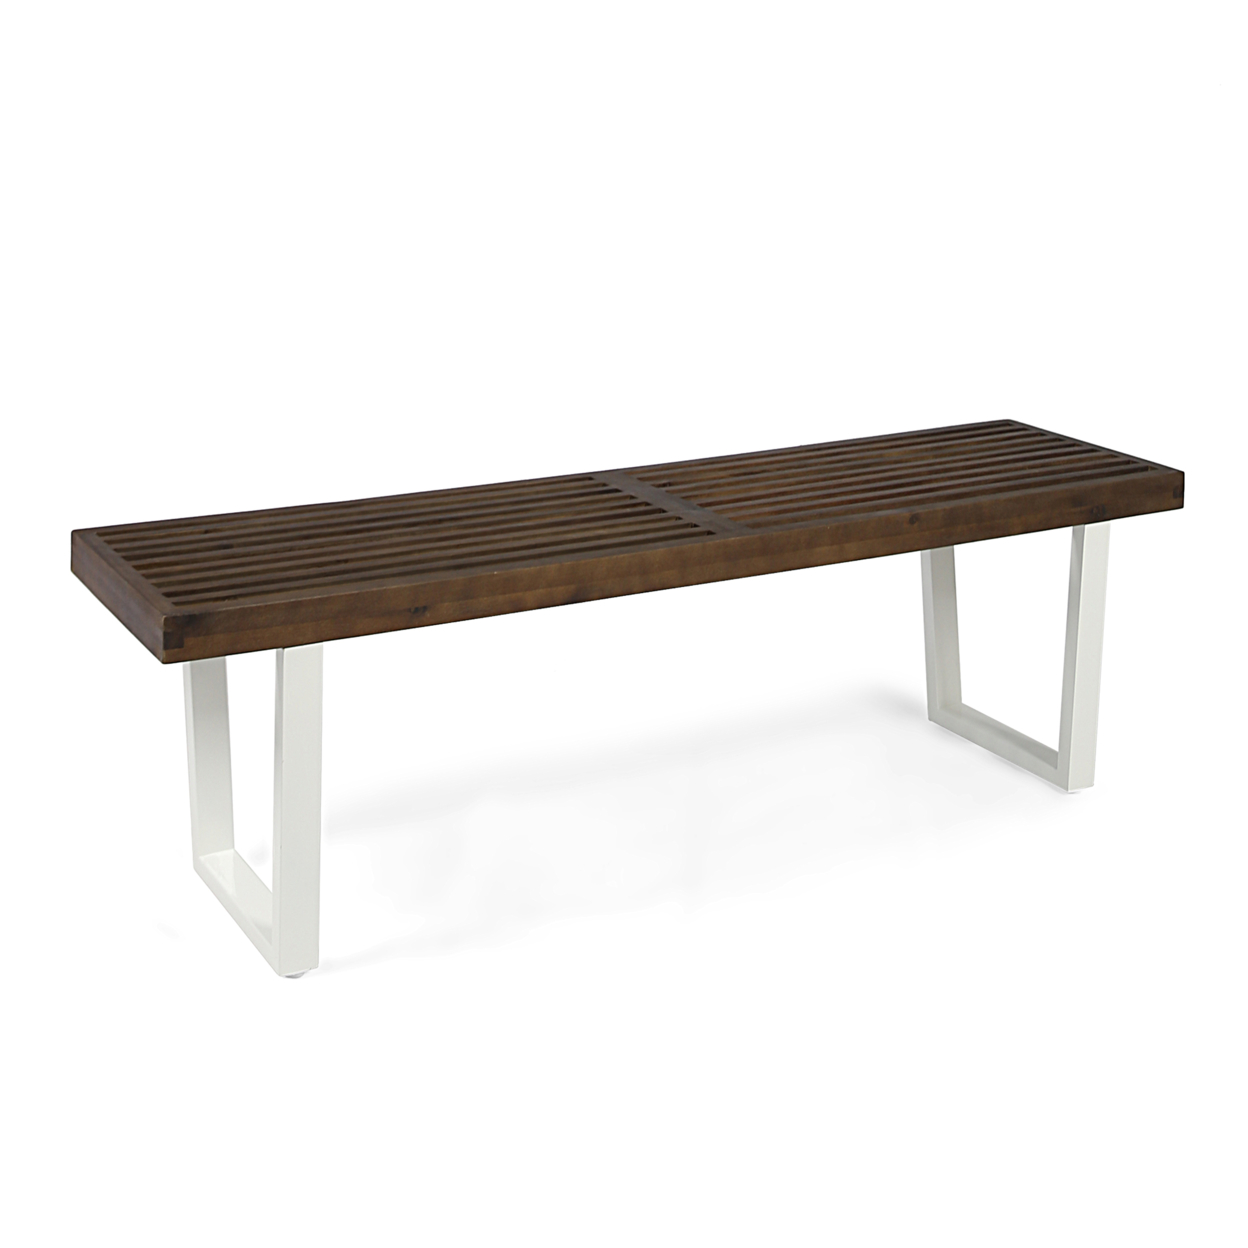 Joa Patio Dining Bench, Acacia Wood With Iron Legs, Modern, Contemporary - Dark Brown / White Wash